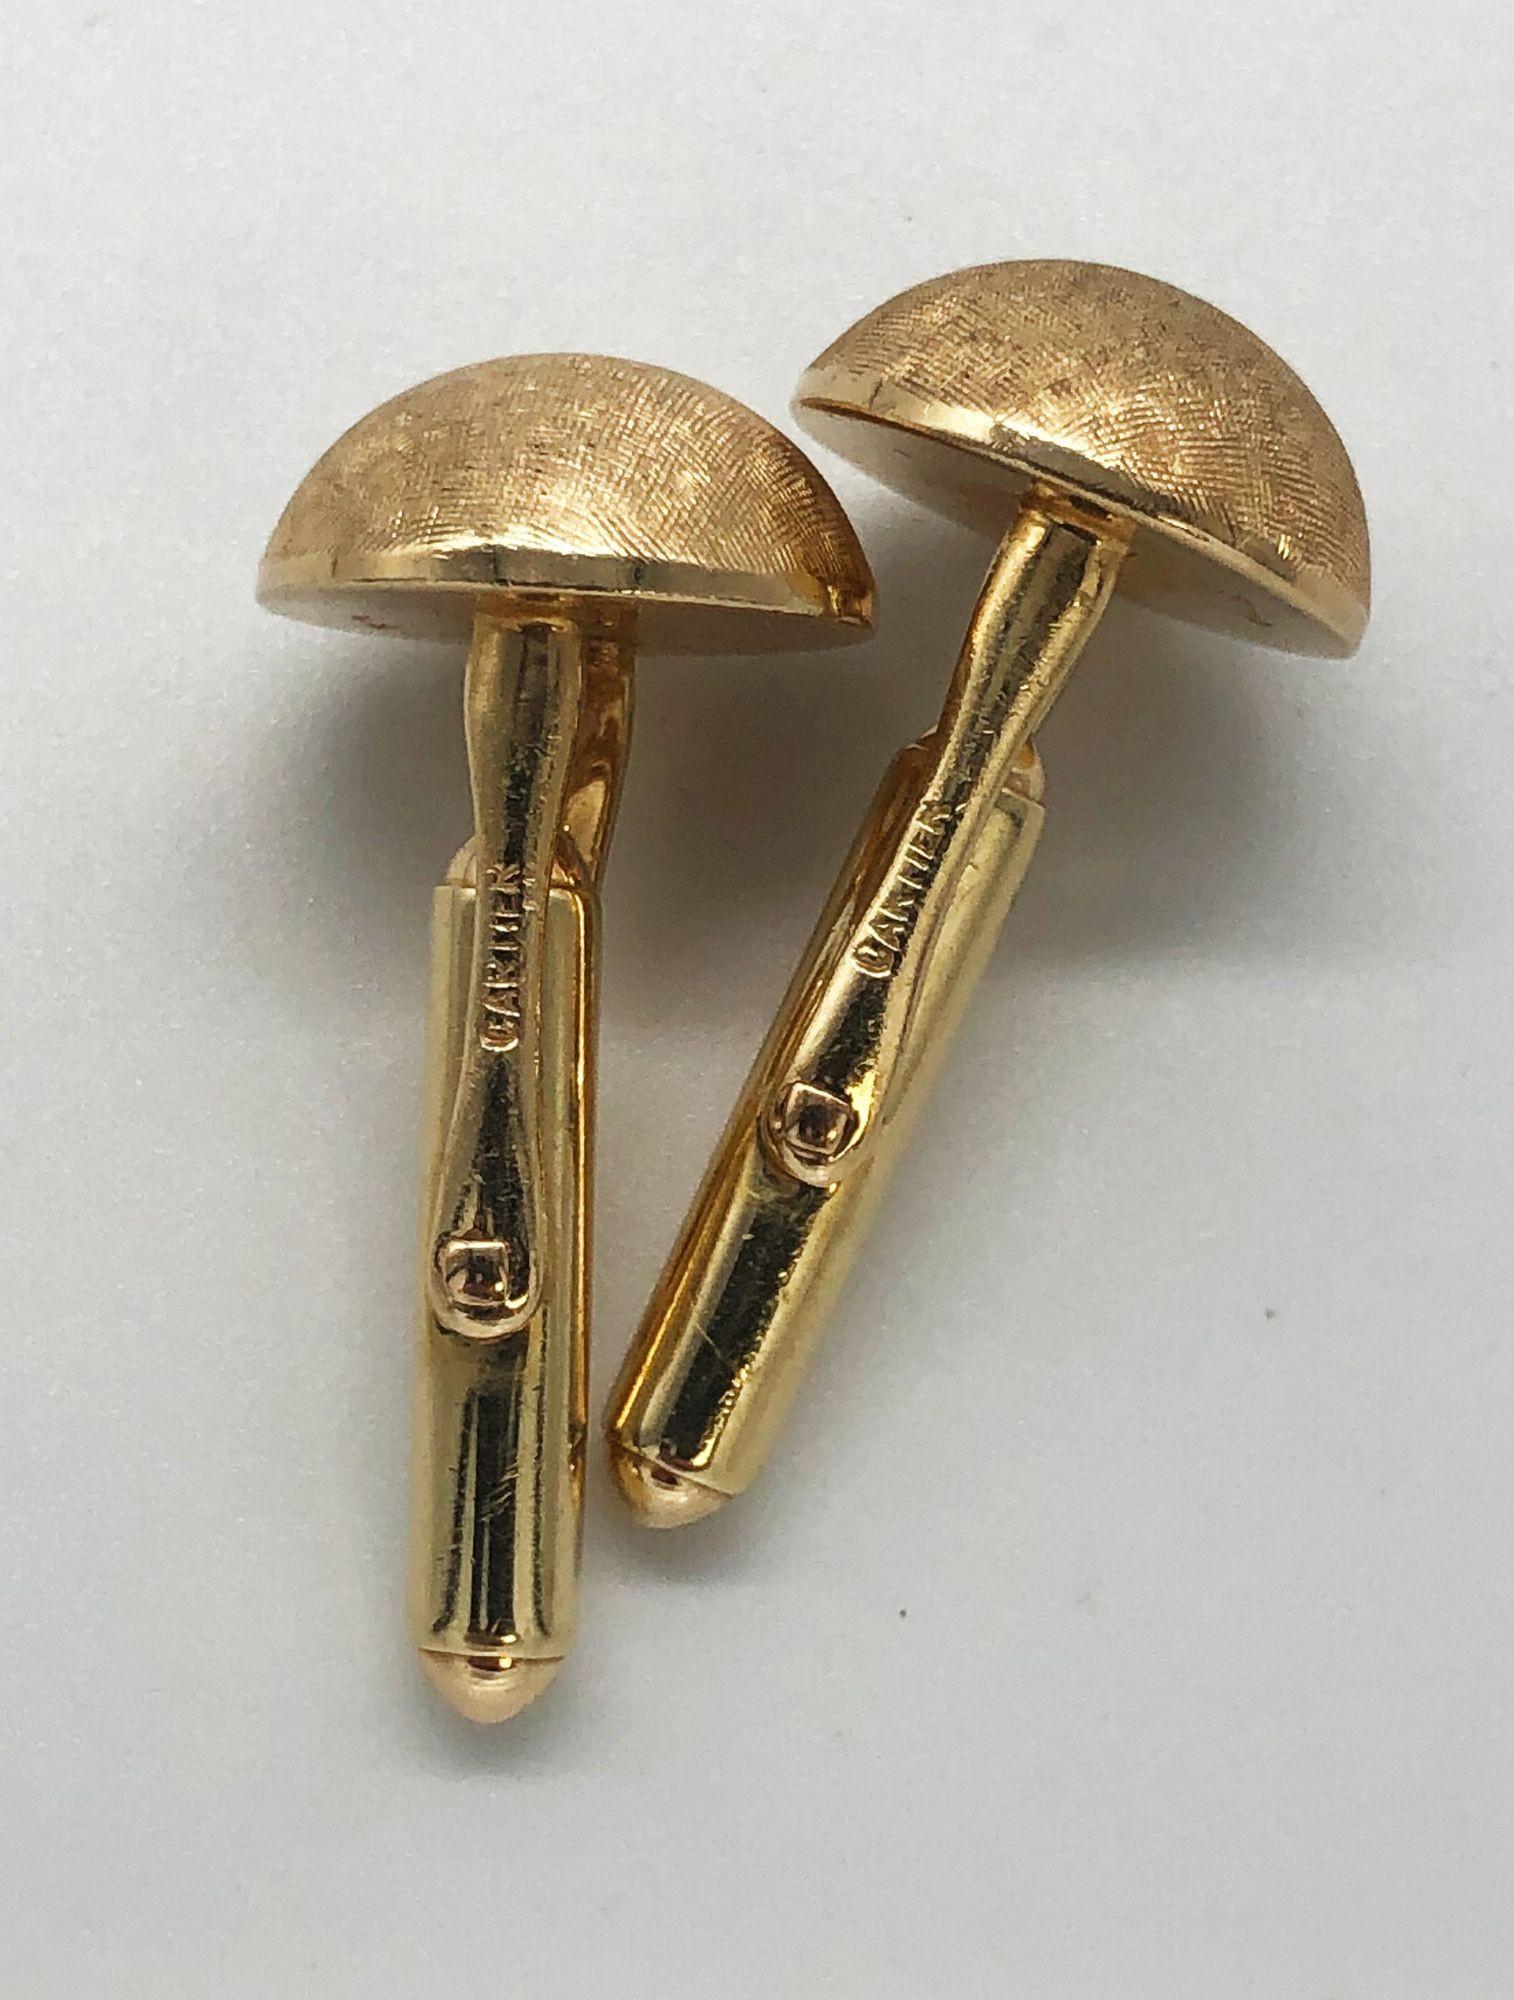 Vintage Mid Century Cartier Brushed Gold Cufflinks In Excellent Condition For Sale In Van Nuys, CA